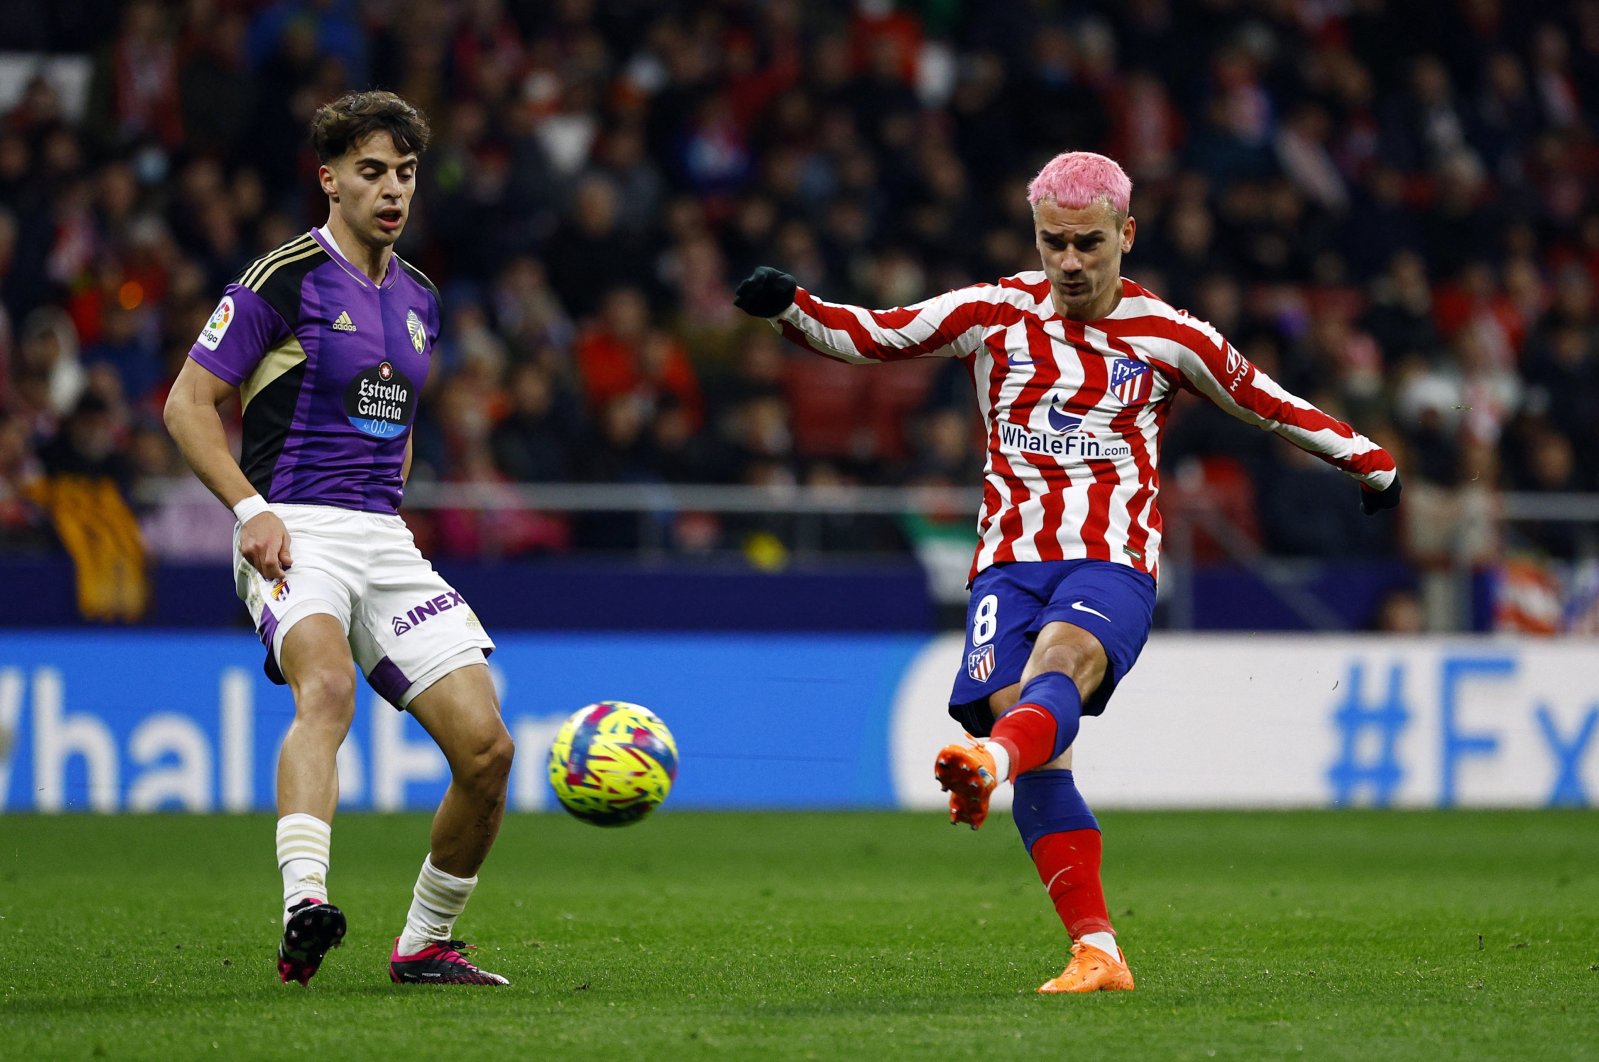 Atletico Madrid&#039;s Antoine Griezmann shoots at goal during Real Valladolid match at the Wanda Metropolitano, Madrid, Spain, Jan. 21, 2023 